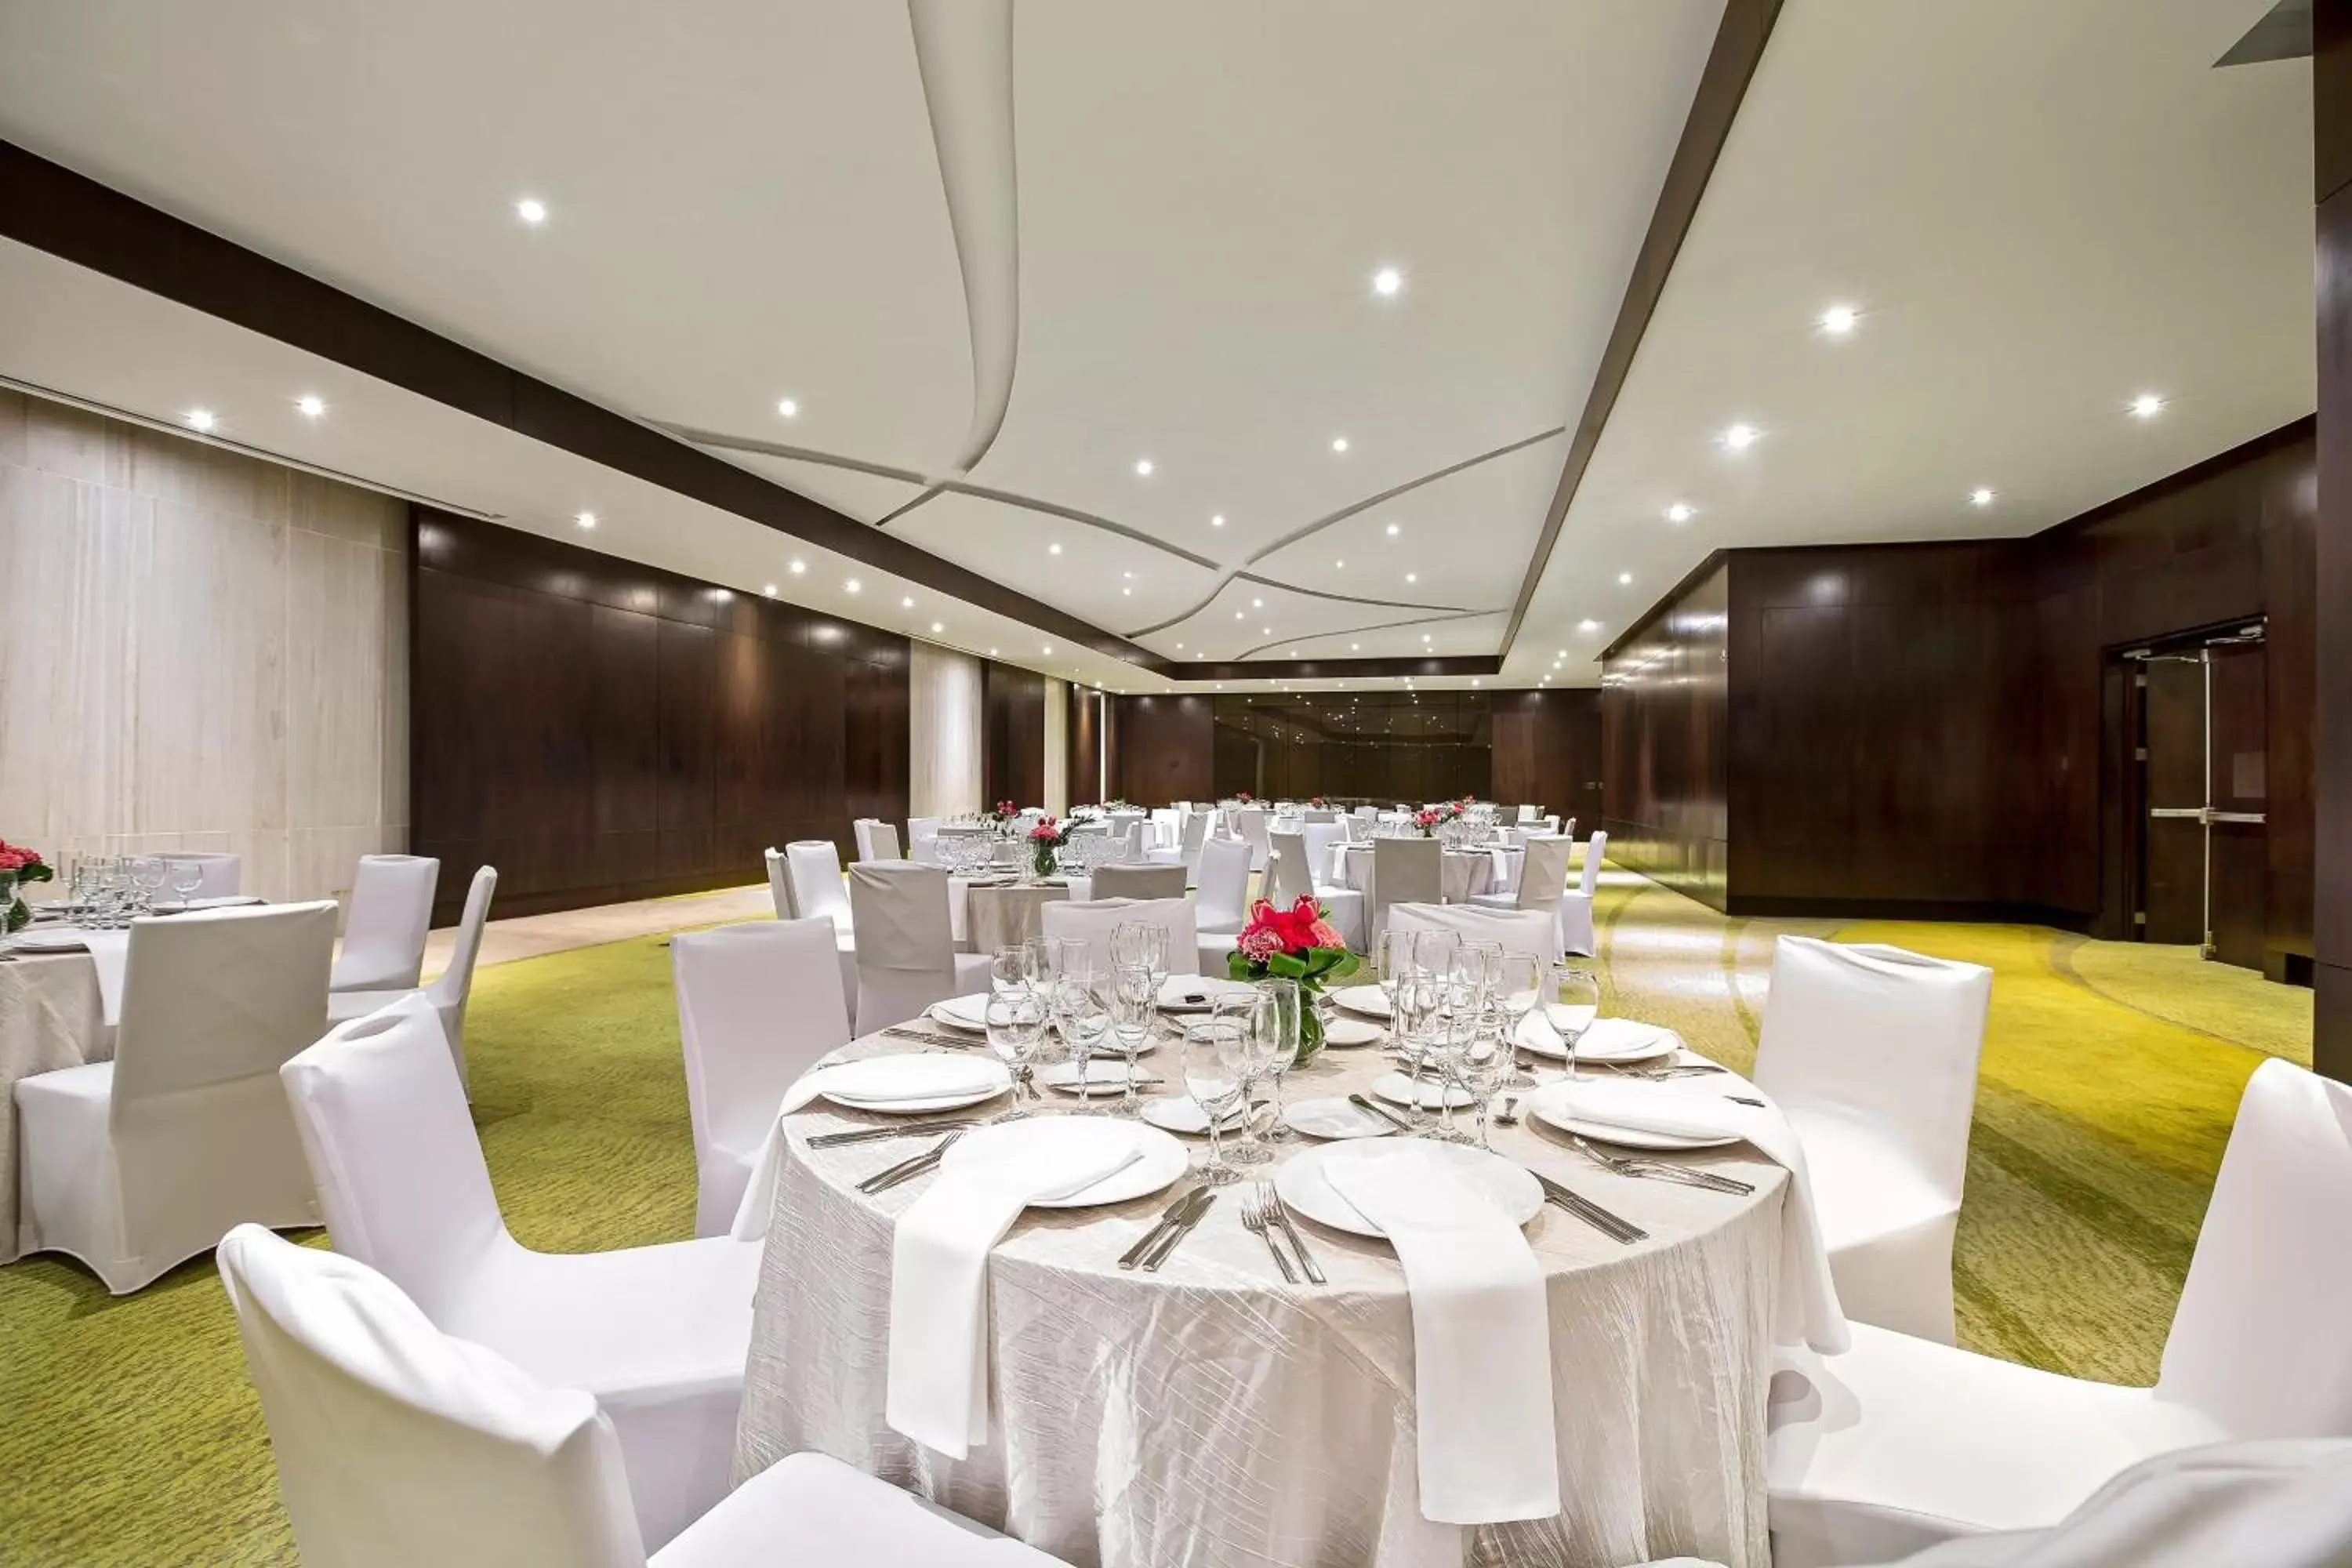 Meeting/conference room, Banquet Facilities in The Westin Panama